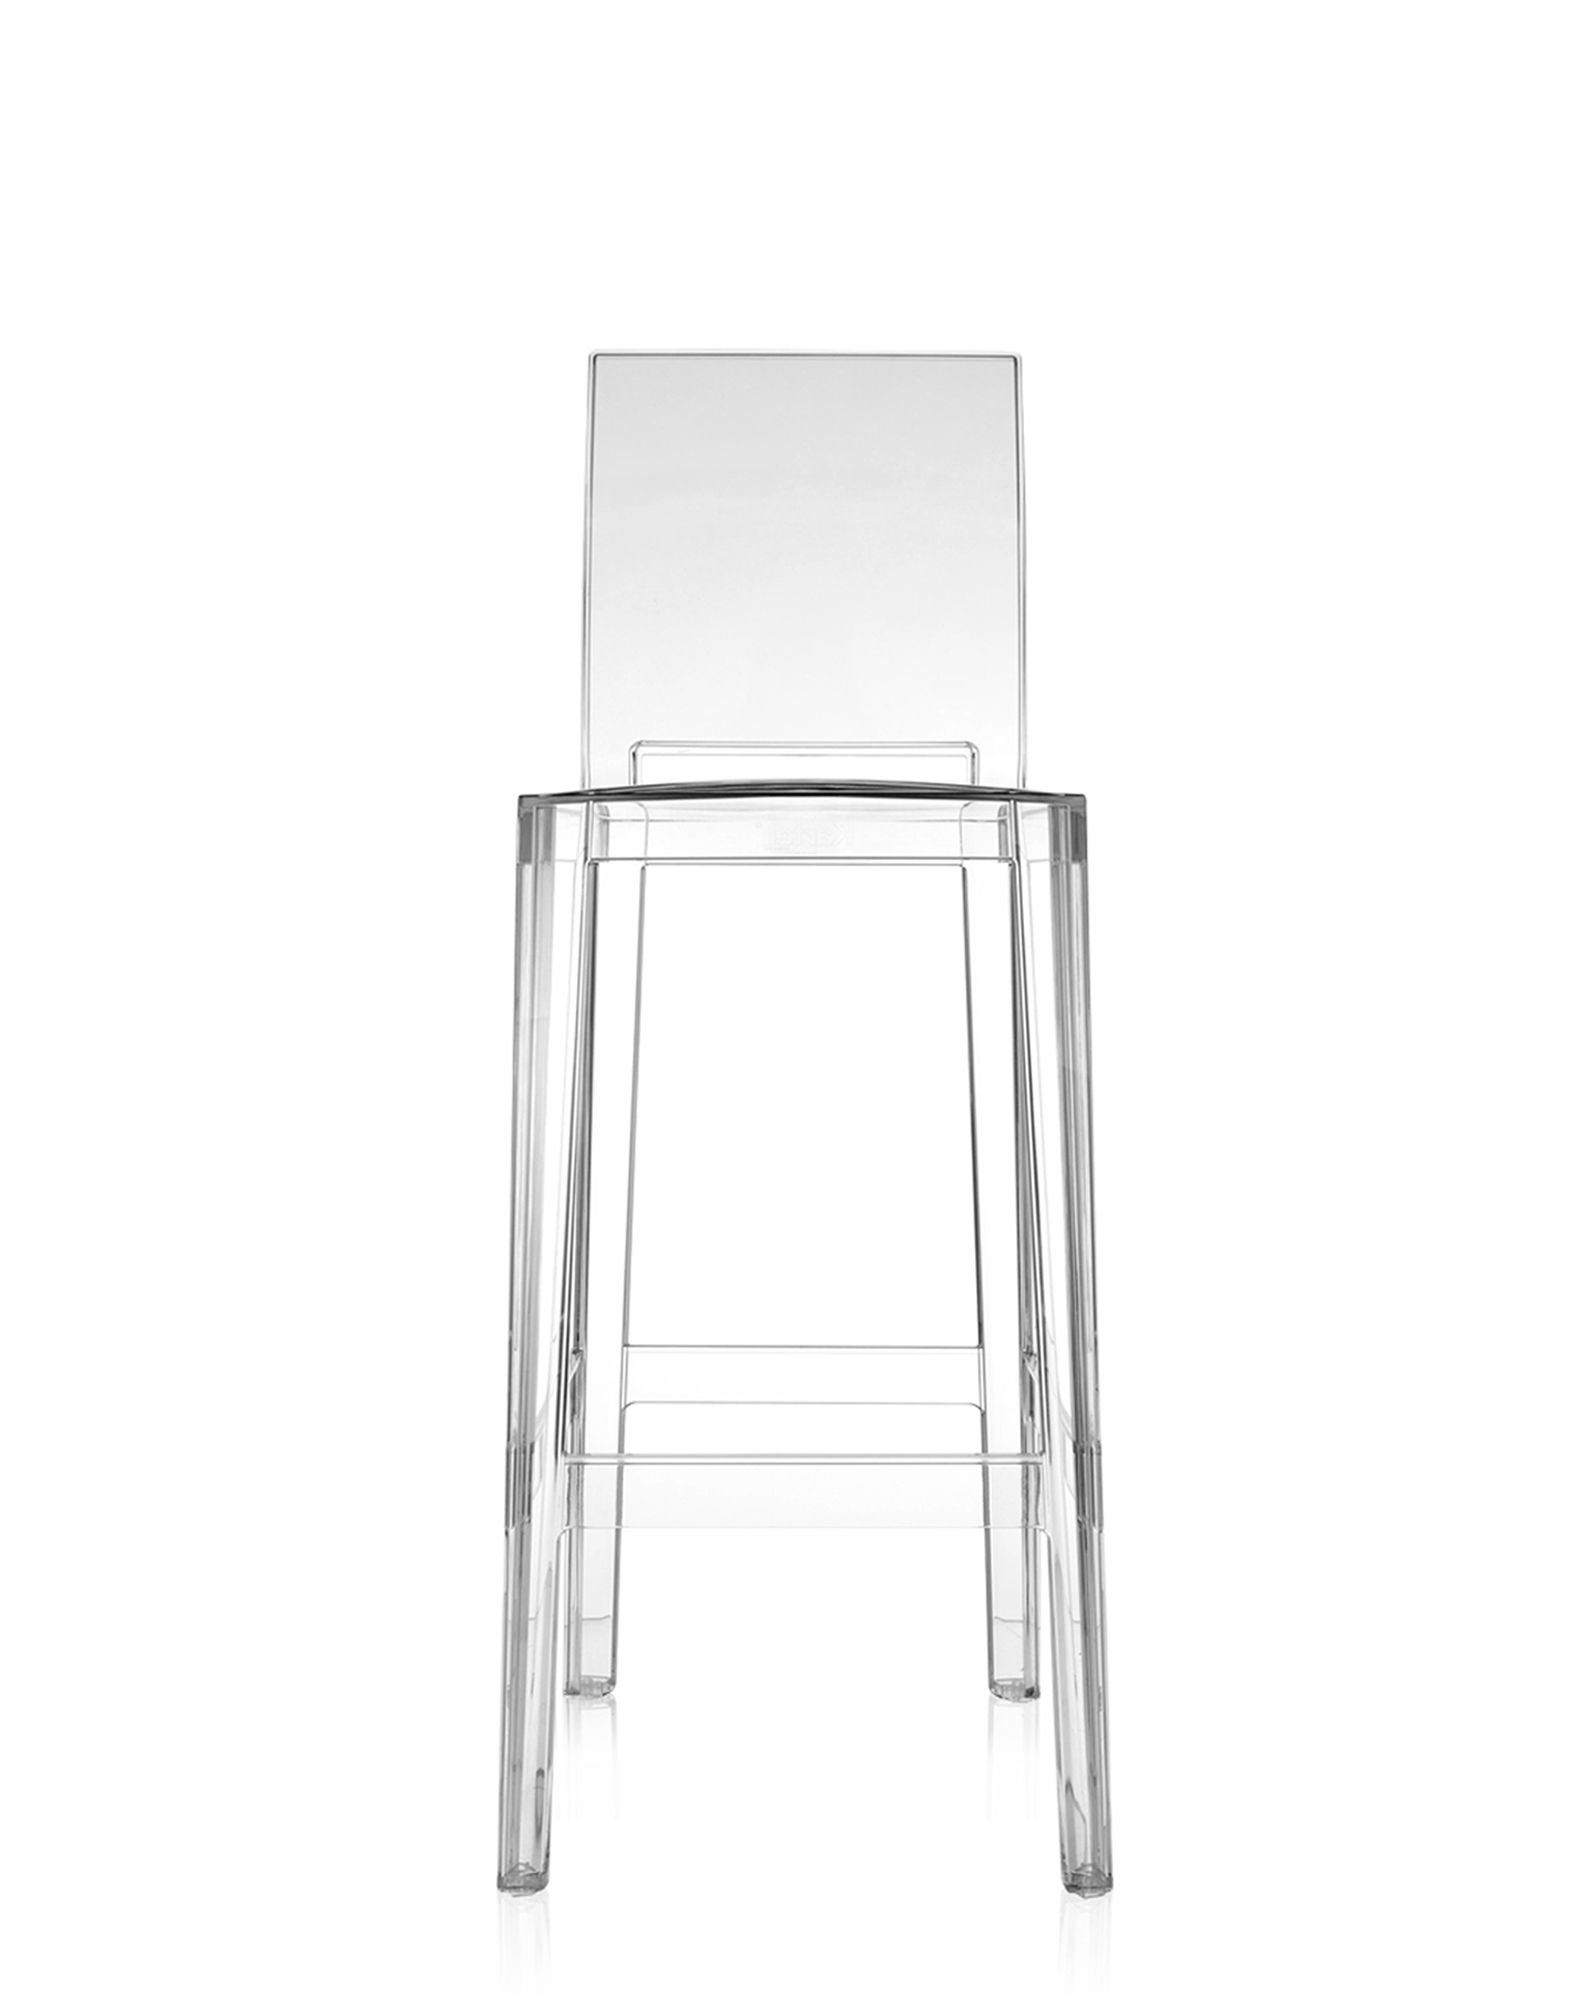 One More Please Stool from Kartell, designed by Philippe Starck